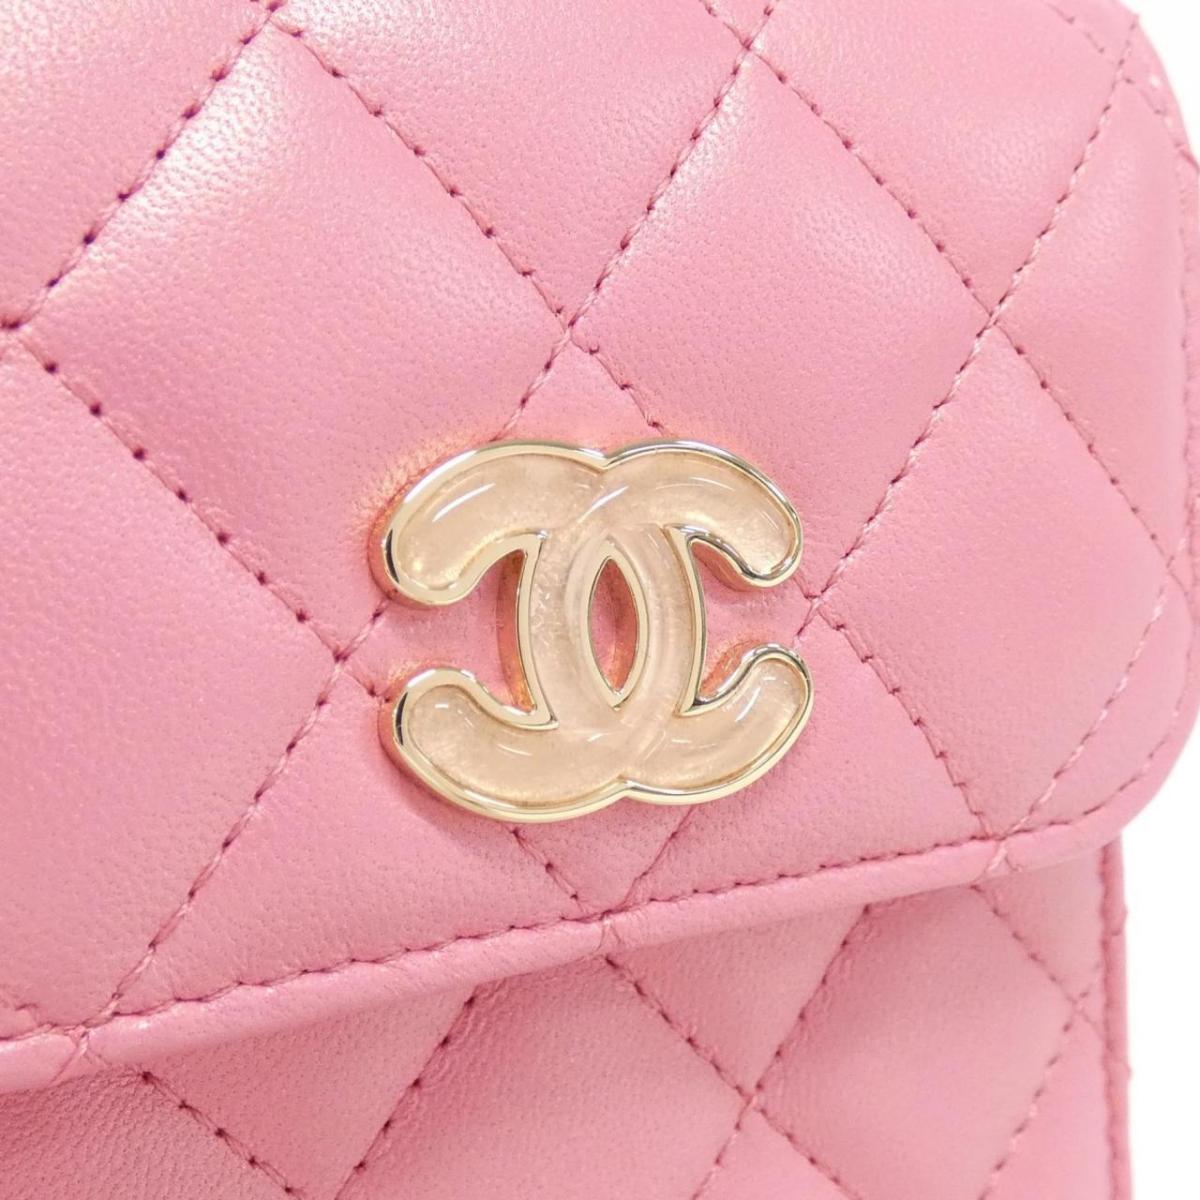 Chanel AP3228 Coin Pouch